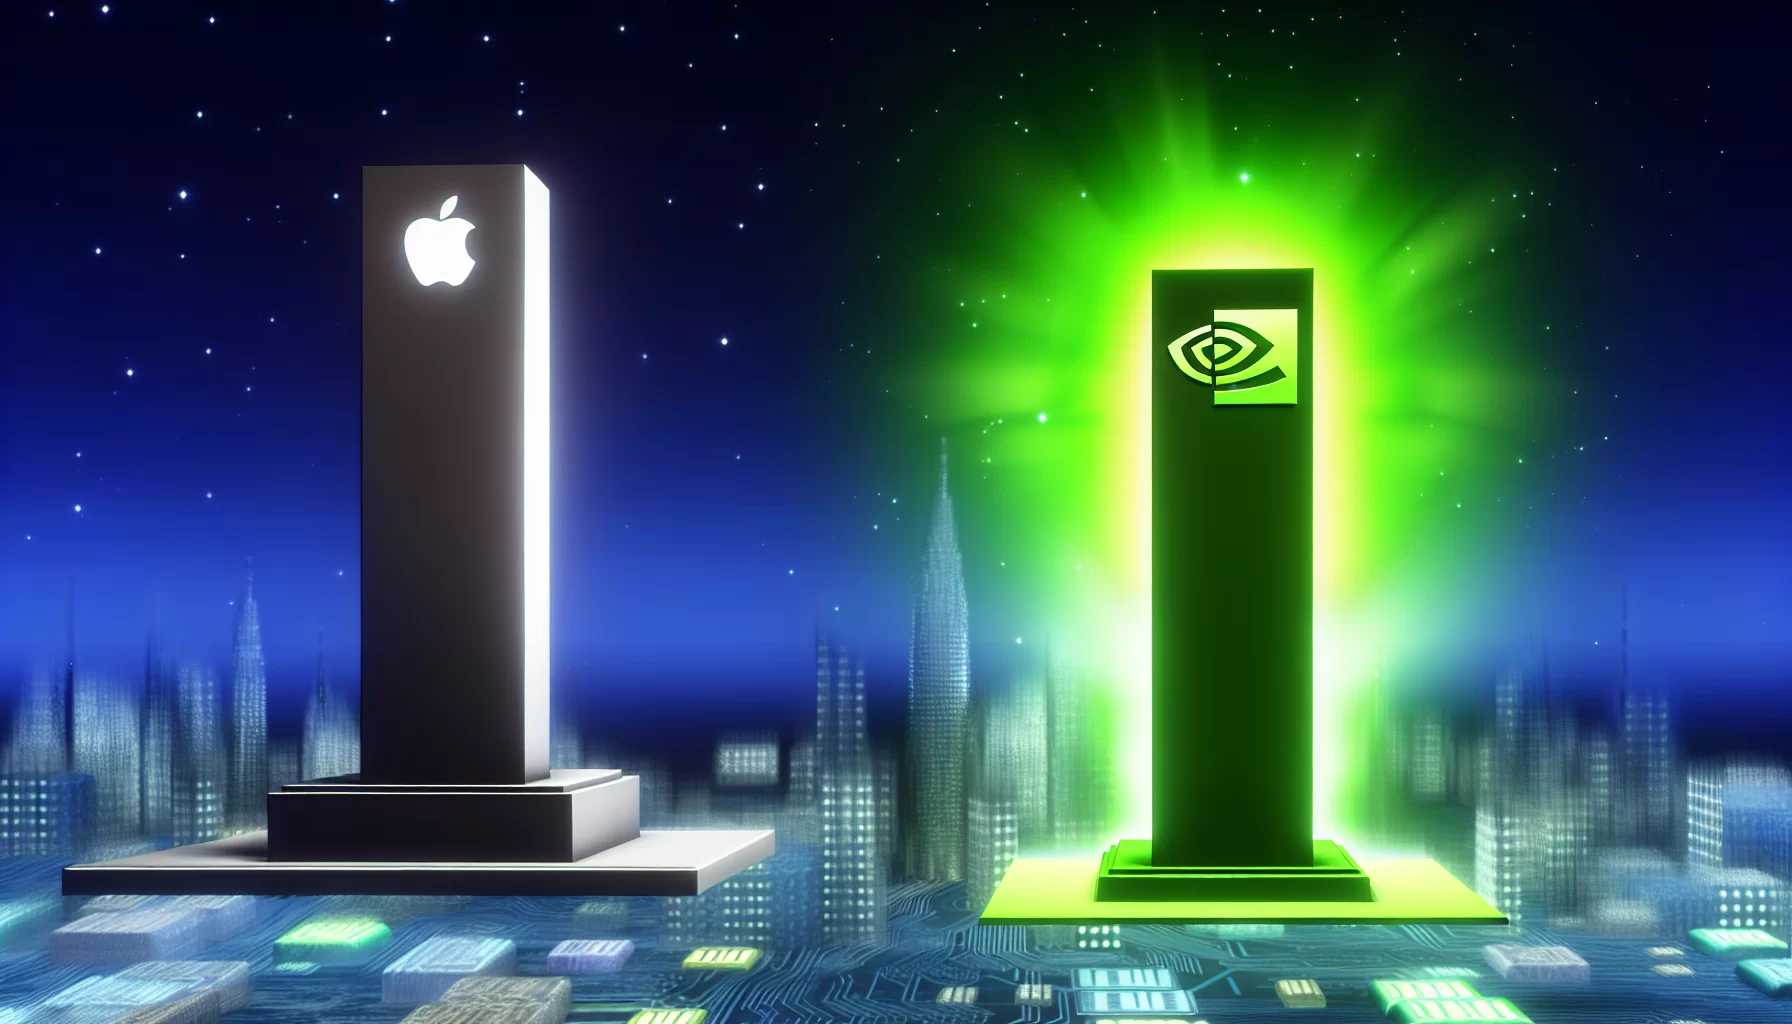 Nvidia surpasses Apple: a historic shift signalling the rise of specialized hardware companies